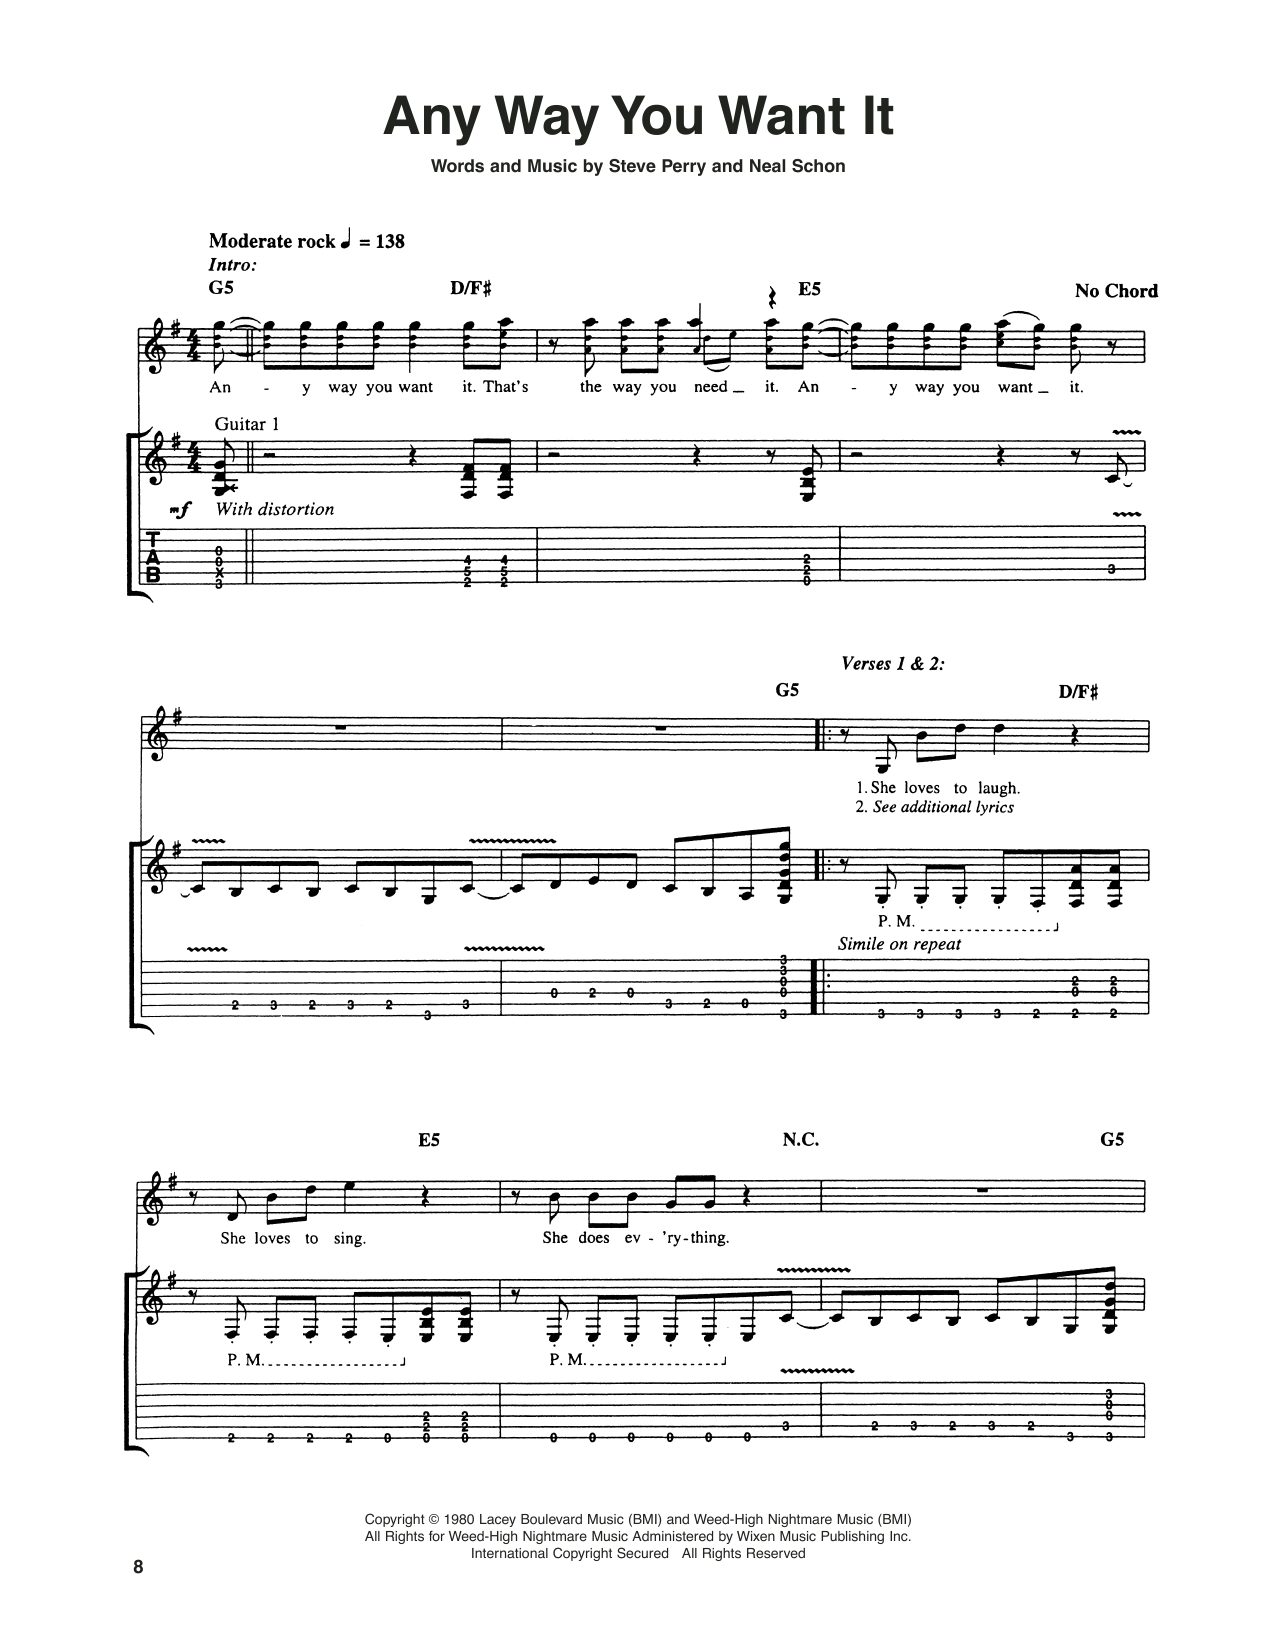 Download Journey Any Way You Want It Sheet Music